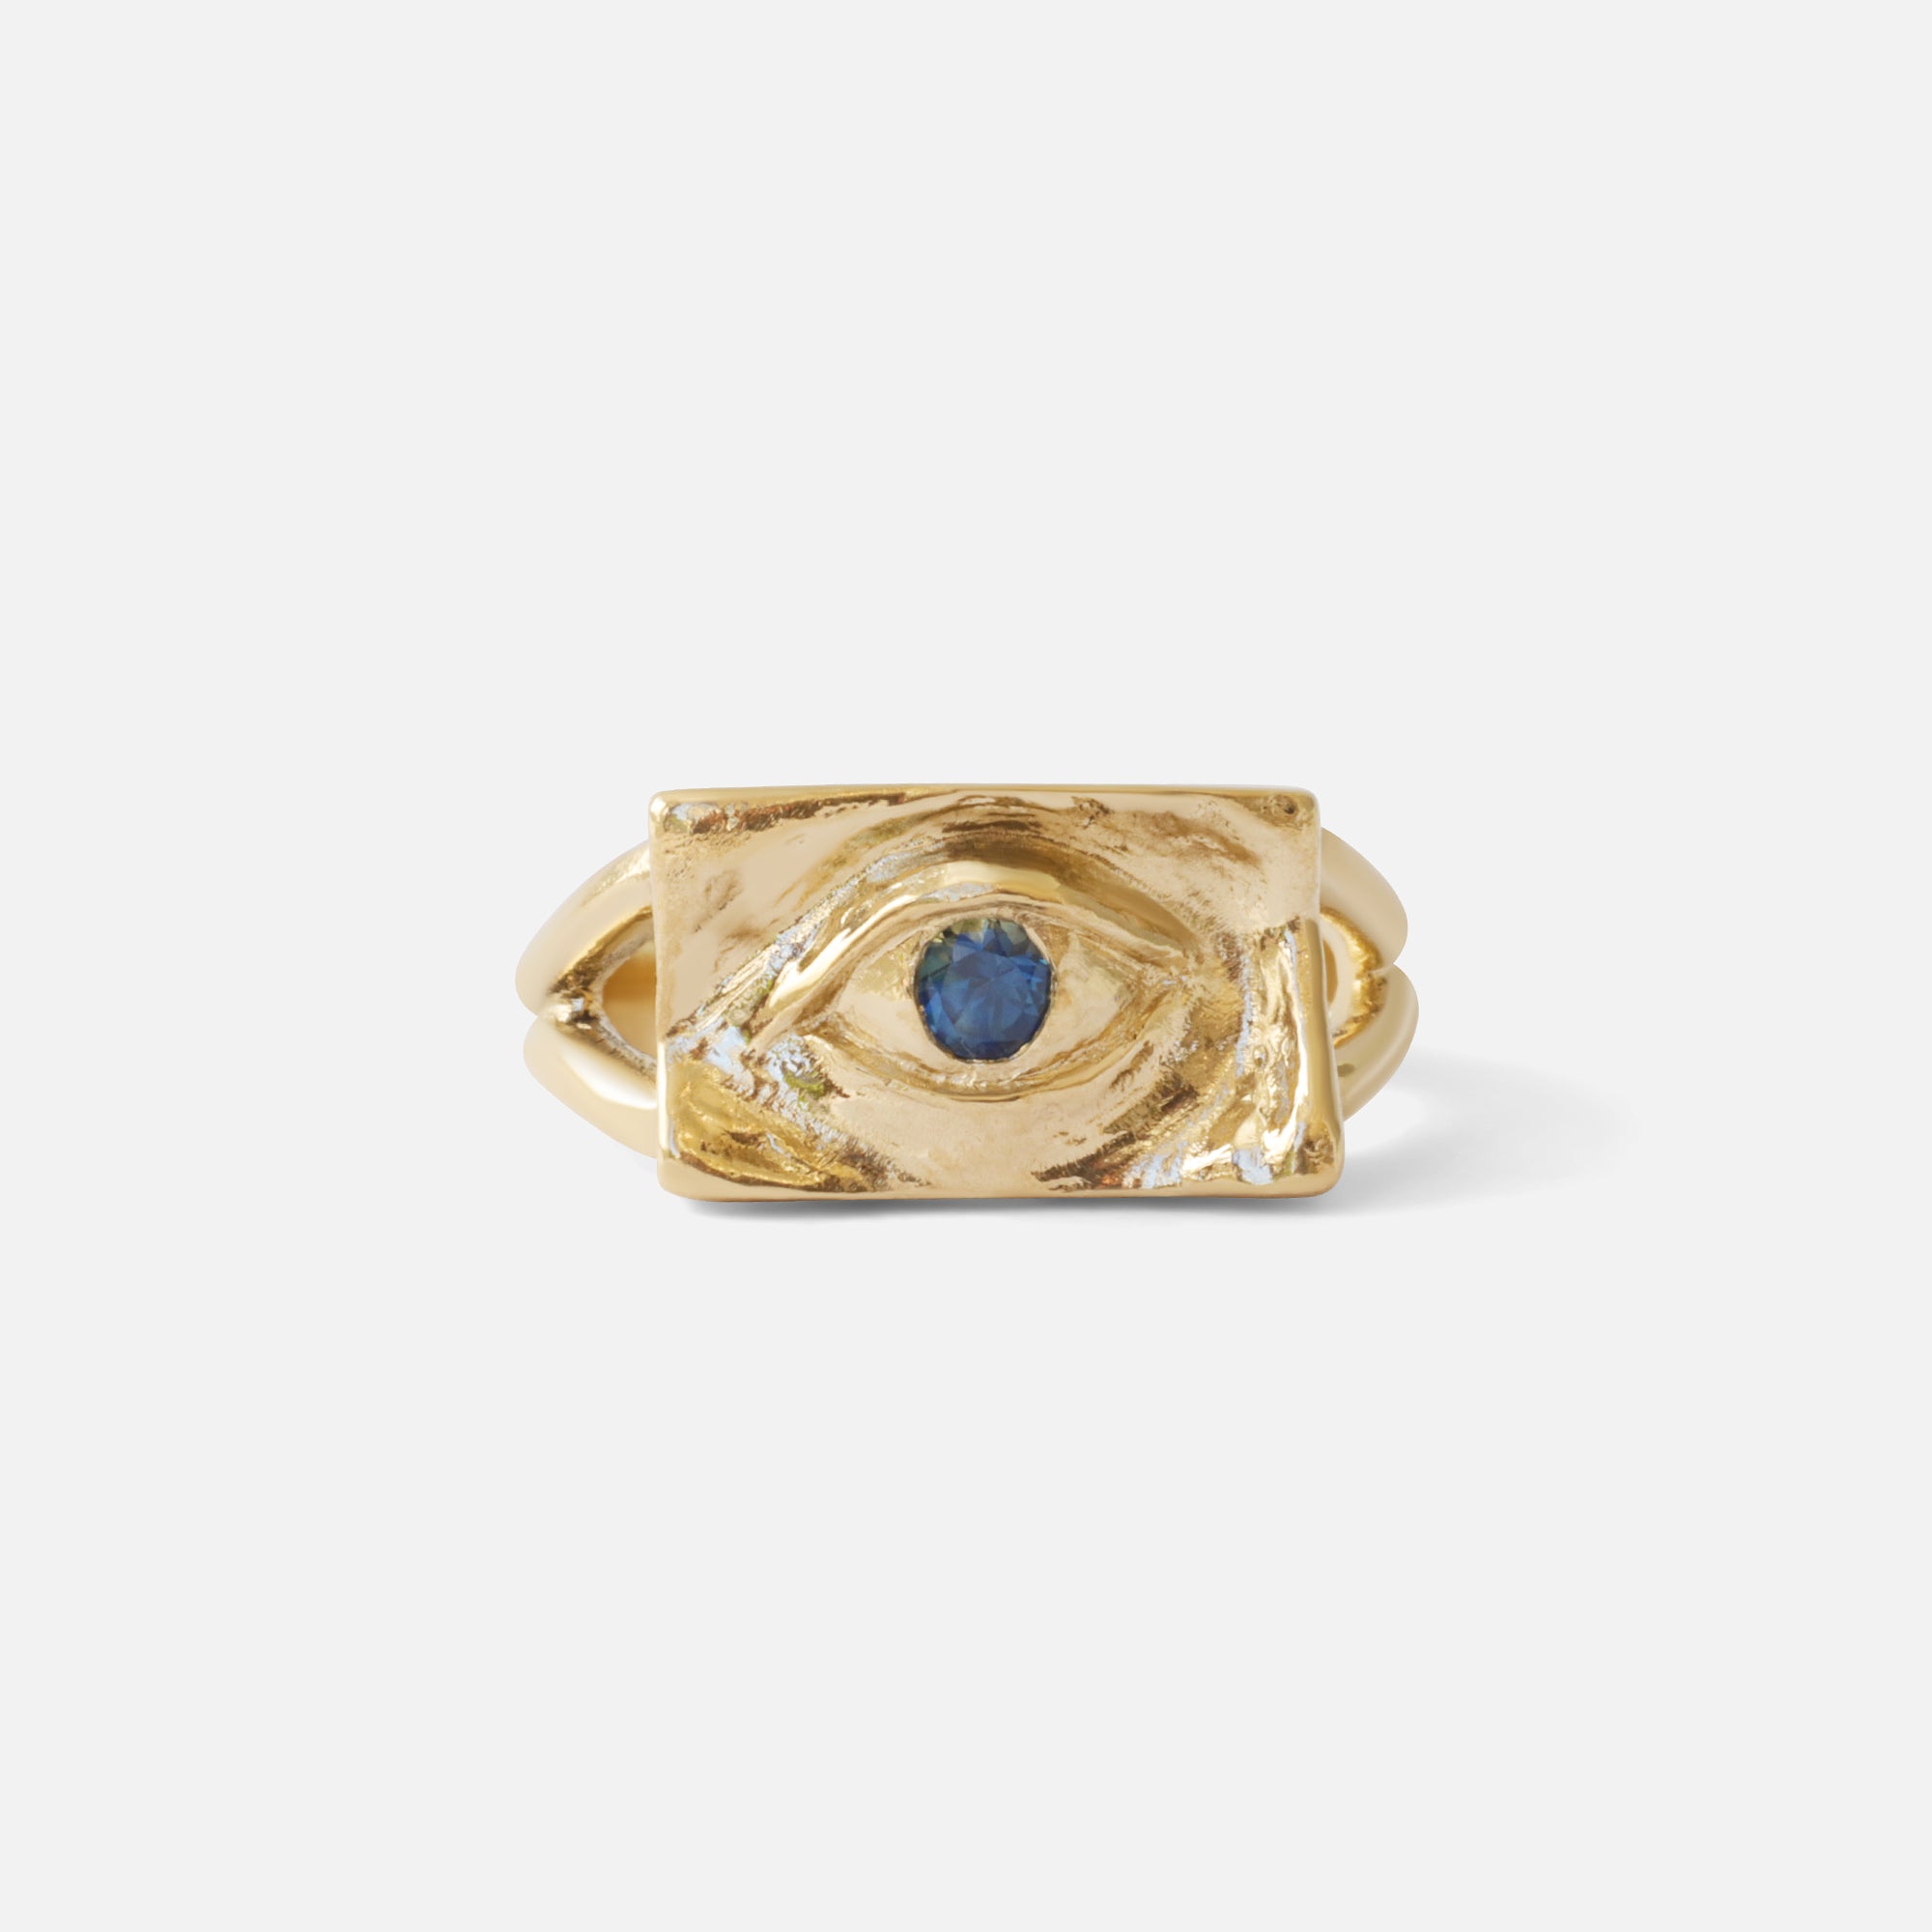 Intagliaux / Blue Sapphire Ring By Alfonzo in rings Category